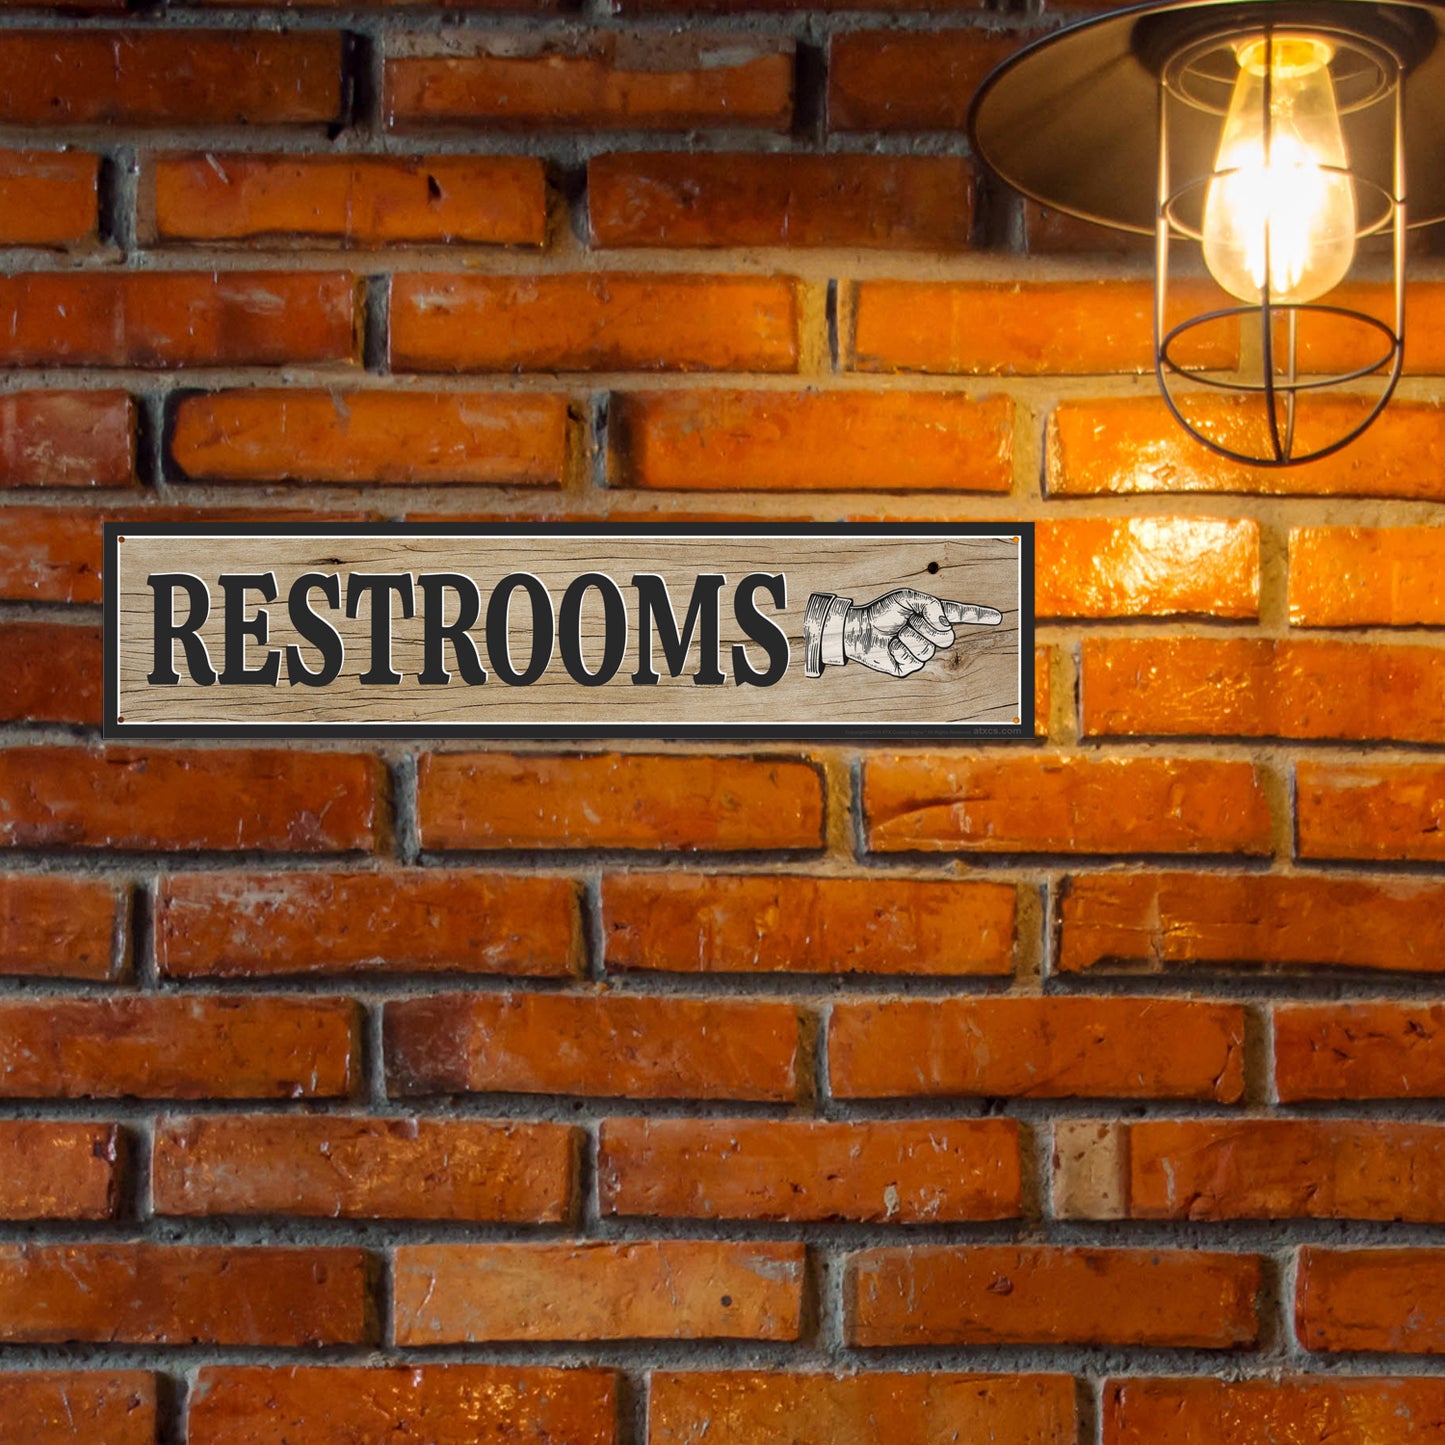 ATX CUSTOM SIGNS - Light Rustic Restroom Hand Pointing Signs - Double Sided Left or Right Pointing 2 Signs Pack